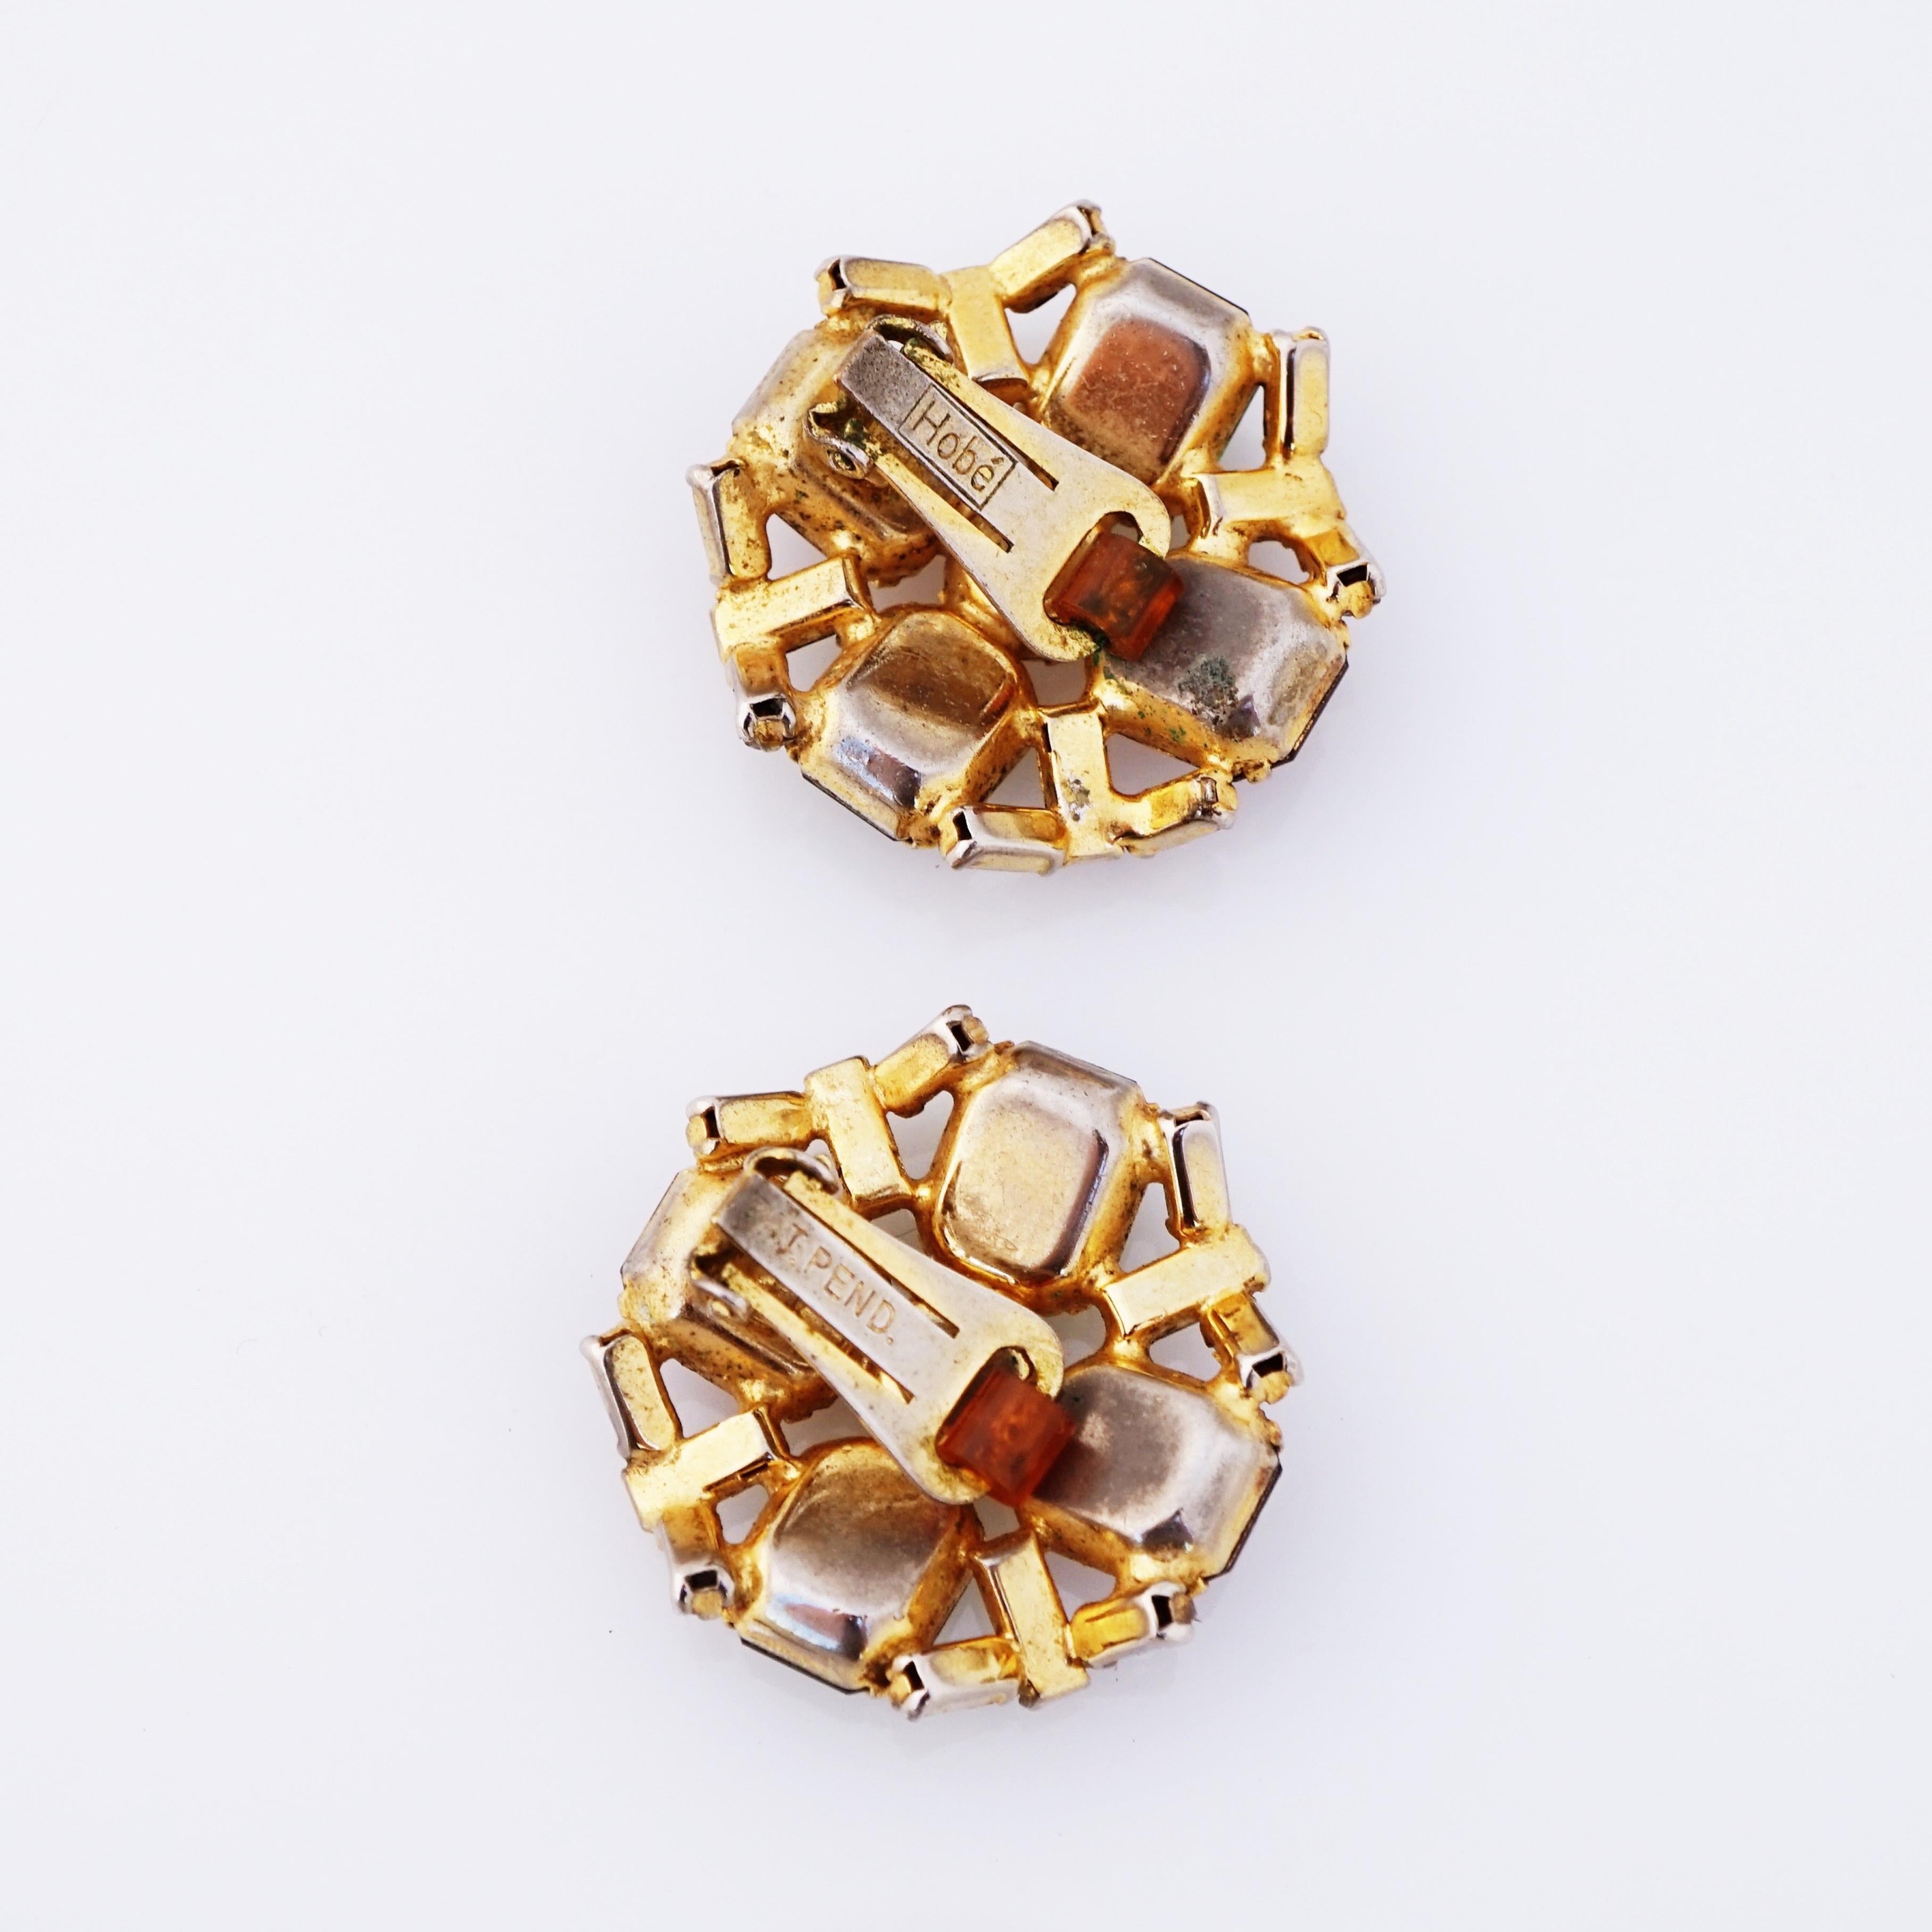 Women's Smoked Topaz and Emerald Rhinestone Crystal Statement Earrings By Hobé, 1960s For Sale